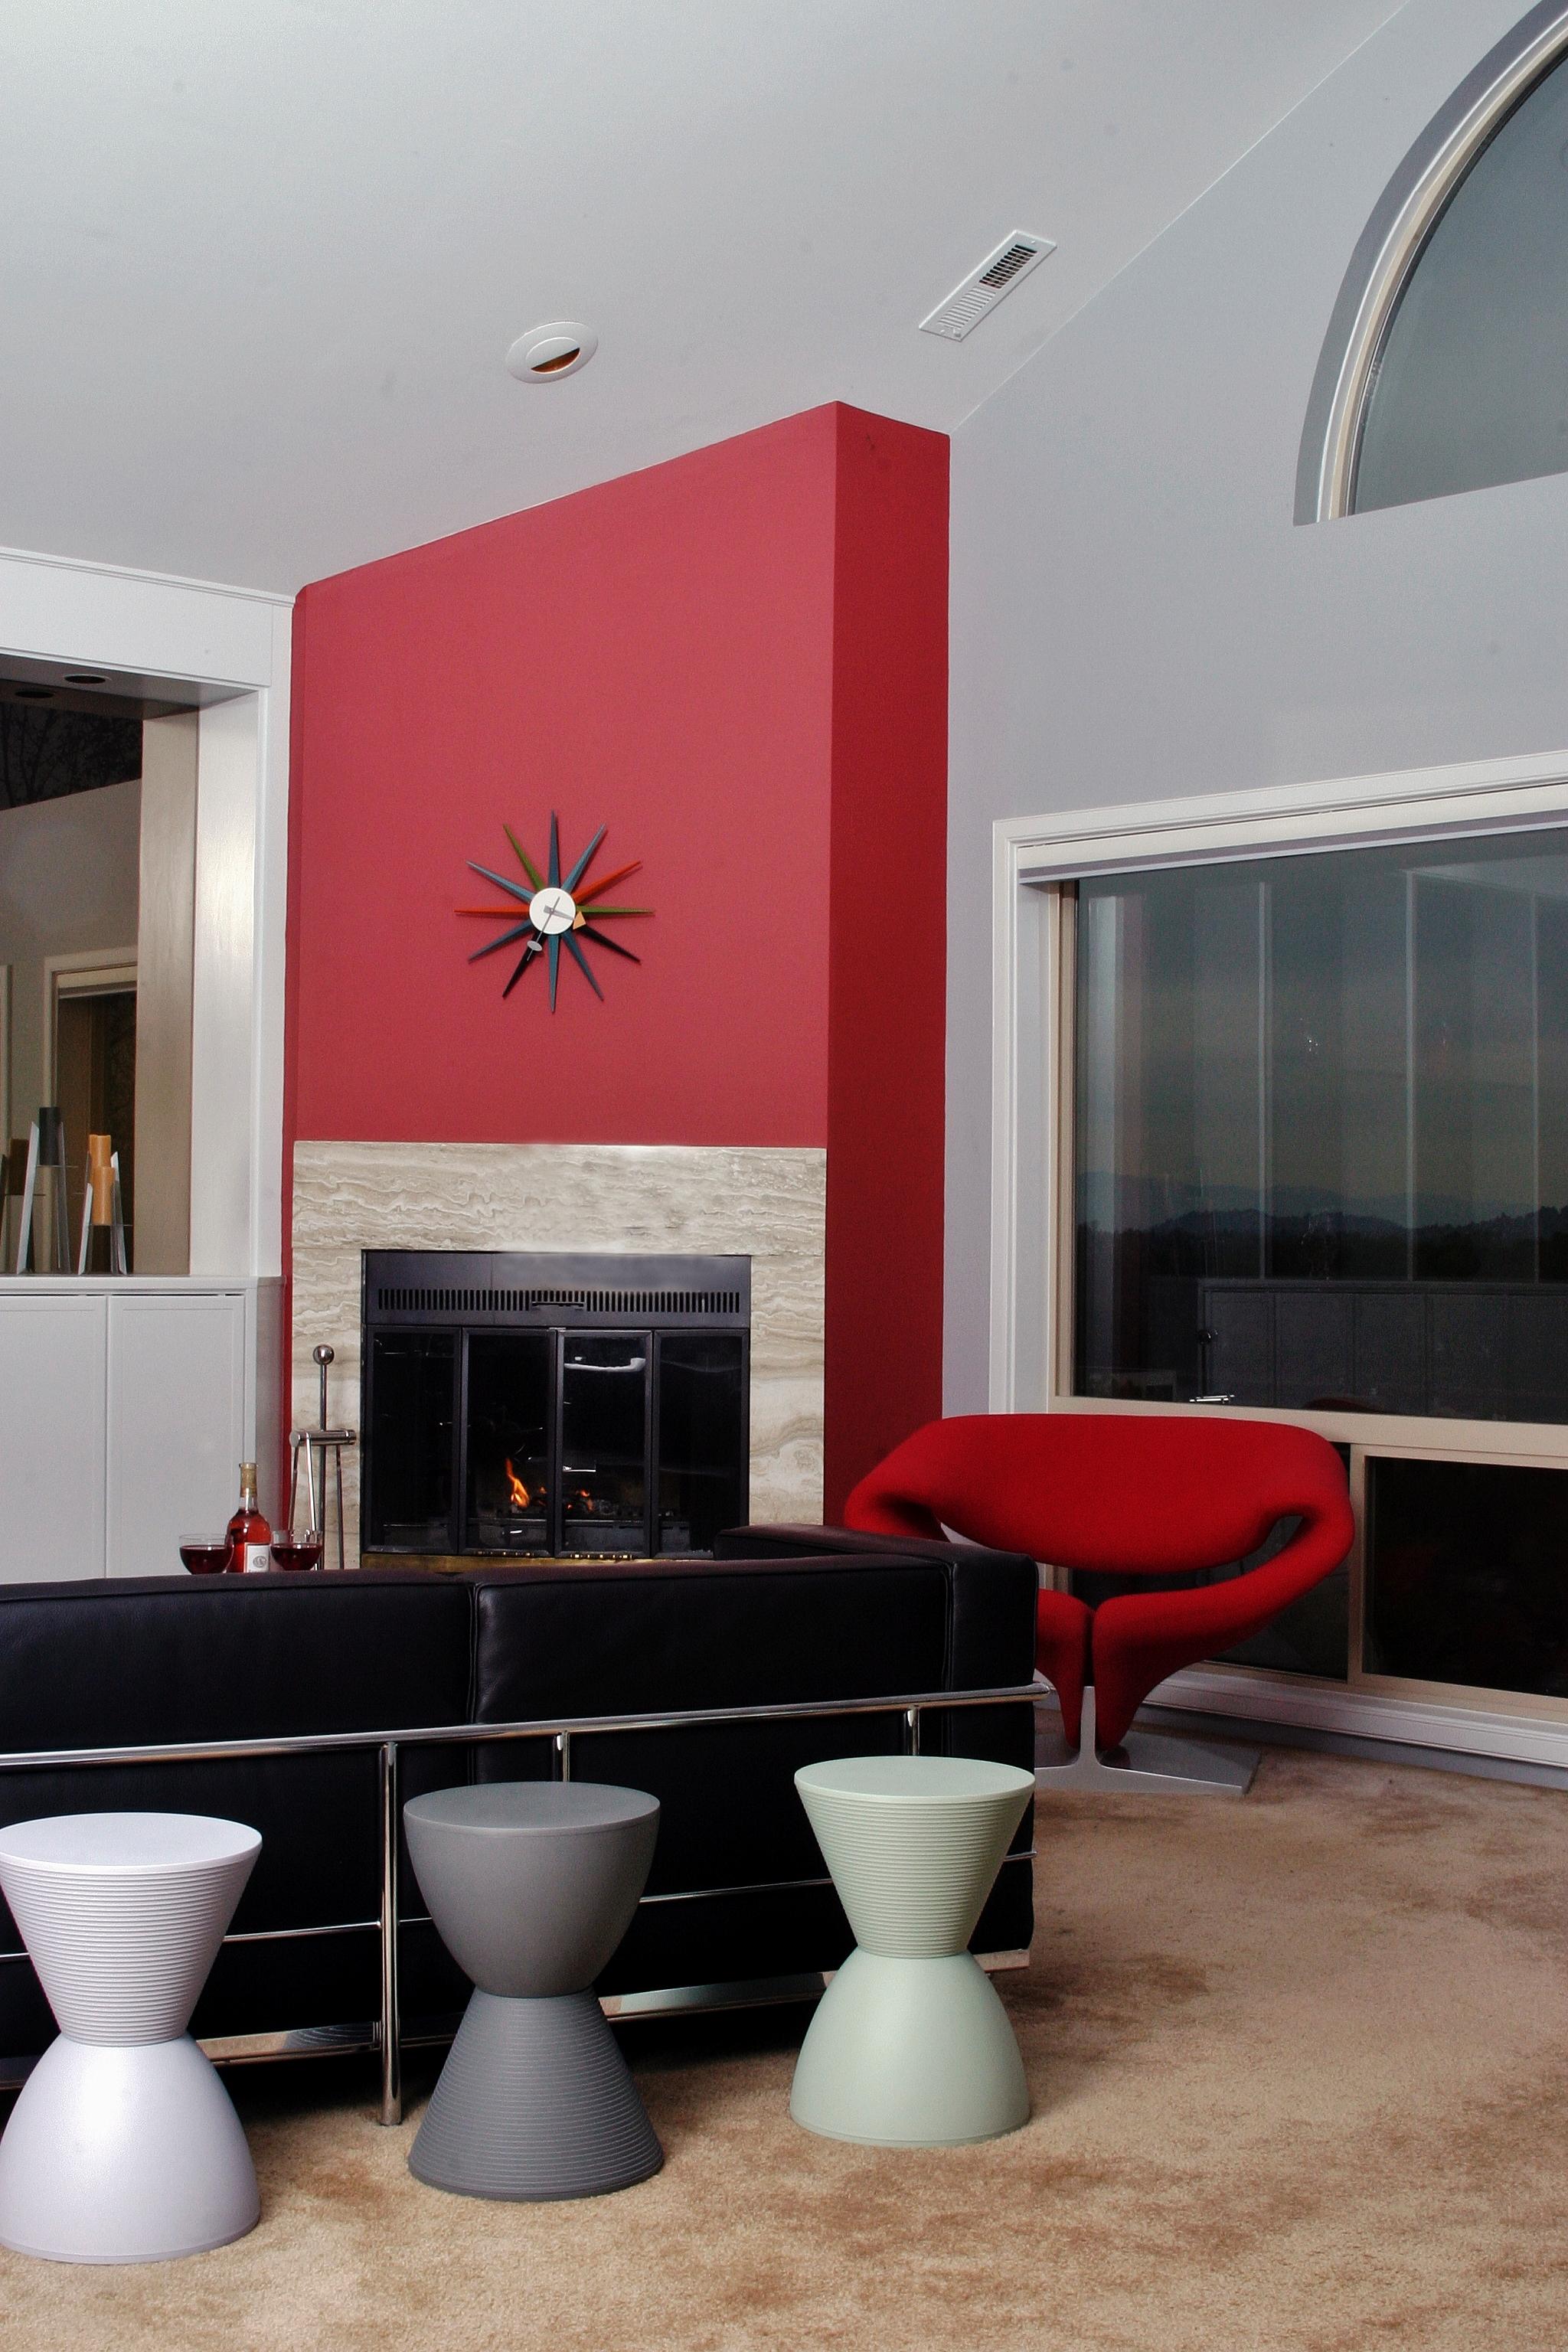 For a fresh take on modern style, my customer and I planned this room around the red diagonal wall surrounding the fireplace. All the furnishings popped in black, white or red.